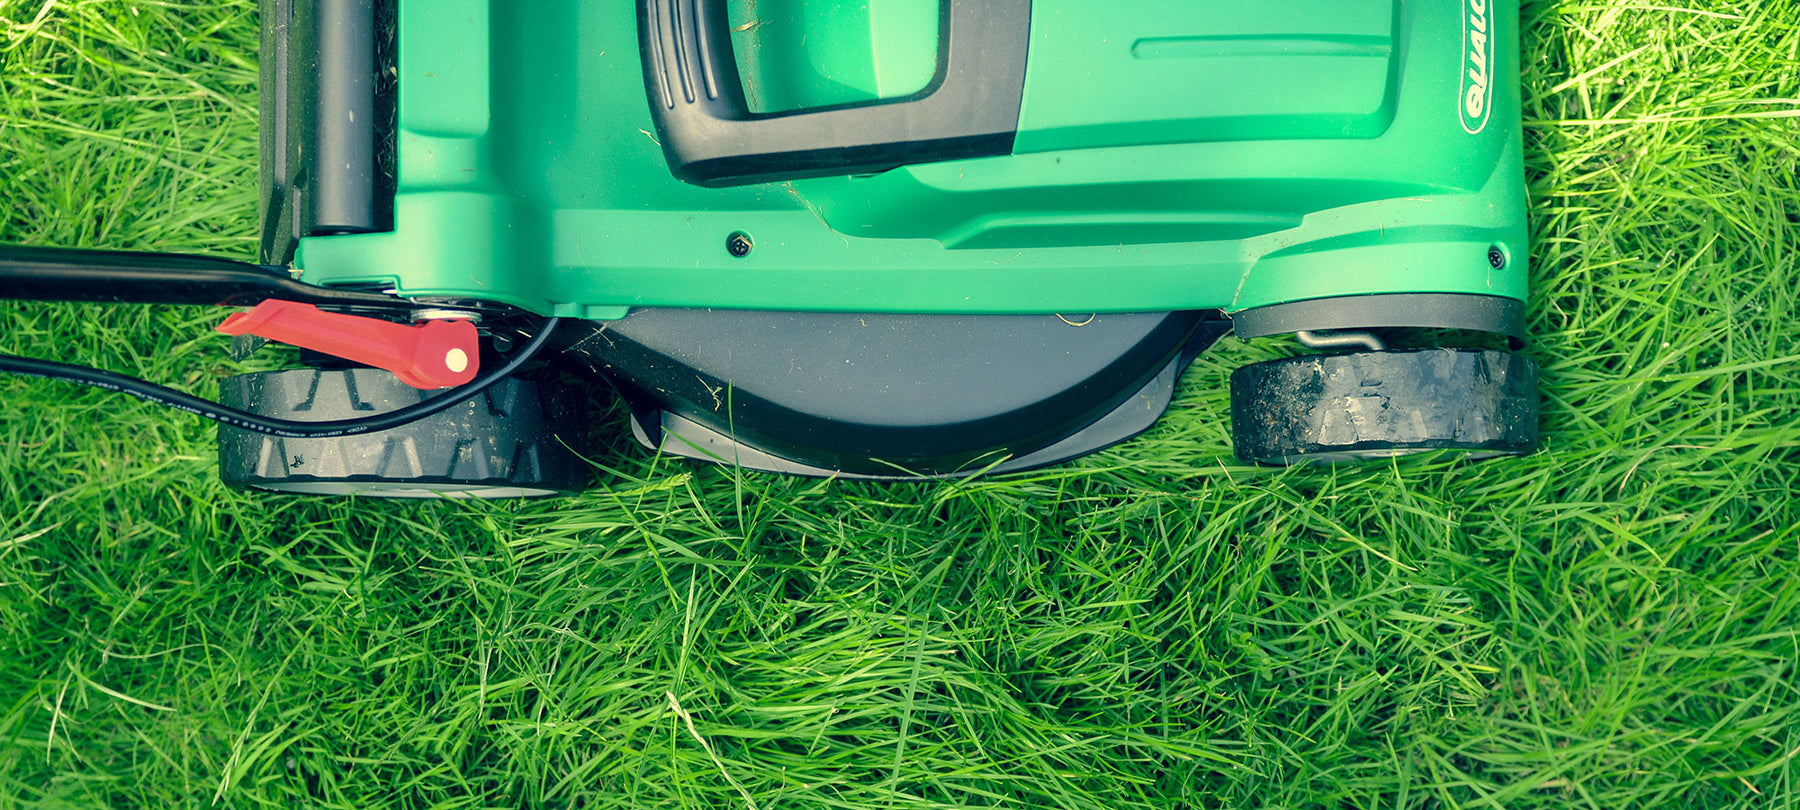 Top 5 Benefits of Battery-Powered Lawn Mower and Garden Equipment